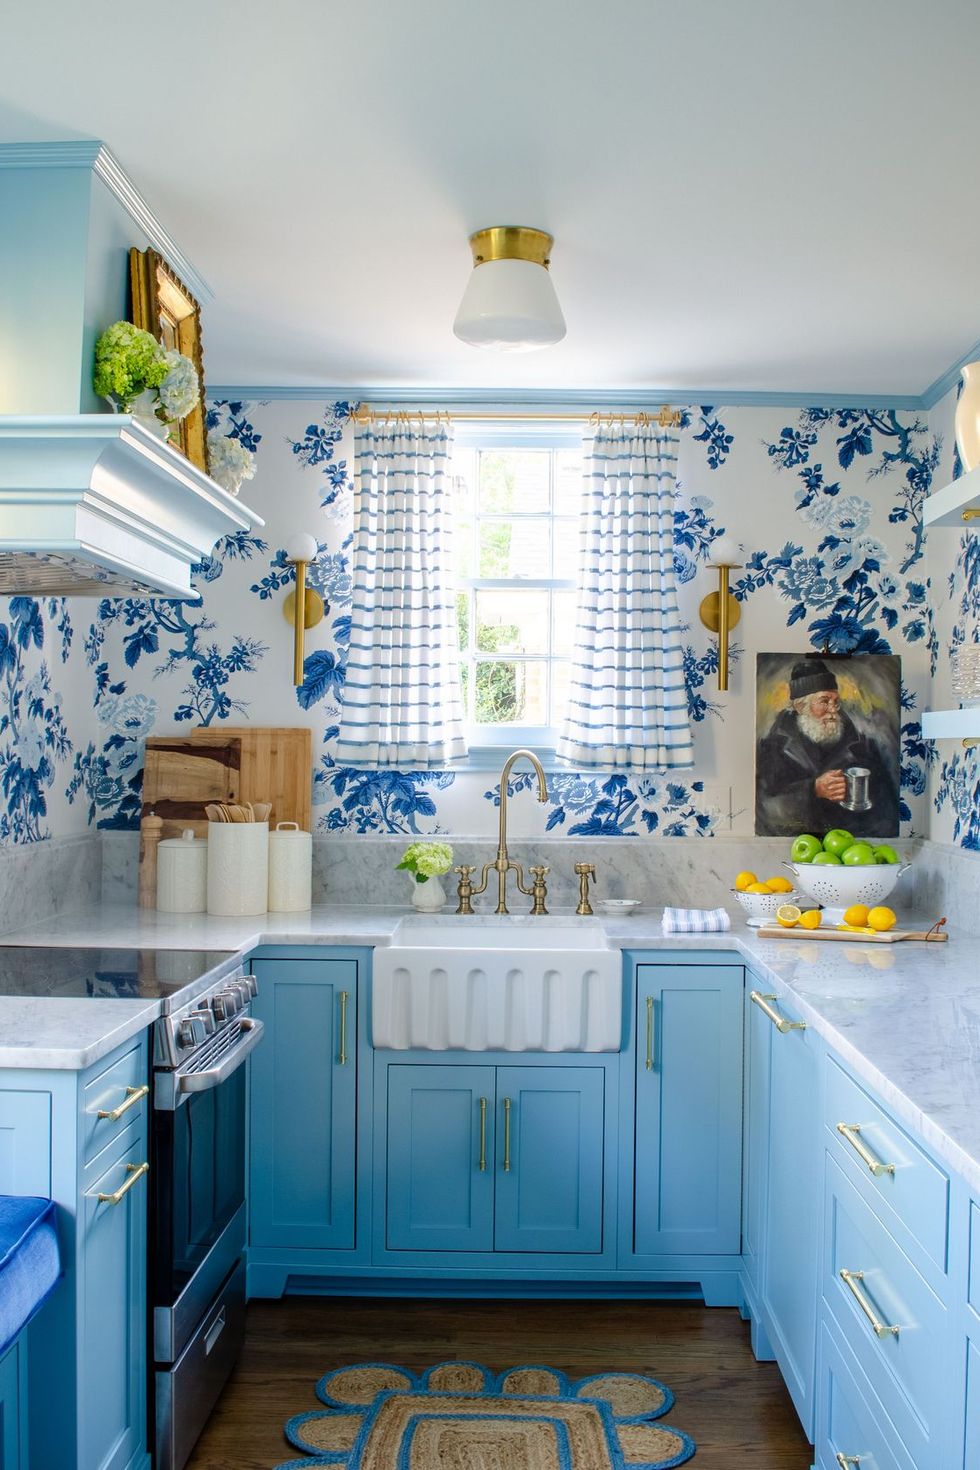 https://hips.hearstapps.com/hmg-prod/images/kitchen-decorating-ideas-blue-and-white-1673364284.jpg?crop=0.9294444444444444xw:1xh;center,top&resize=980:*